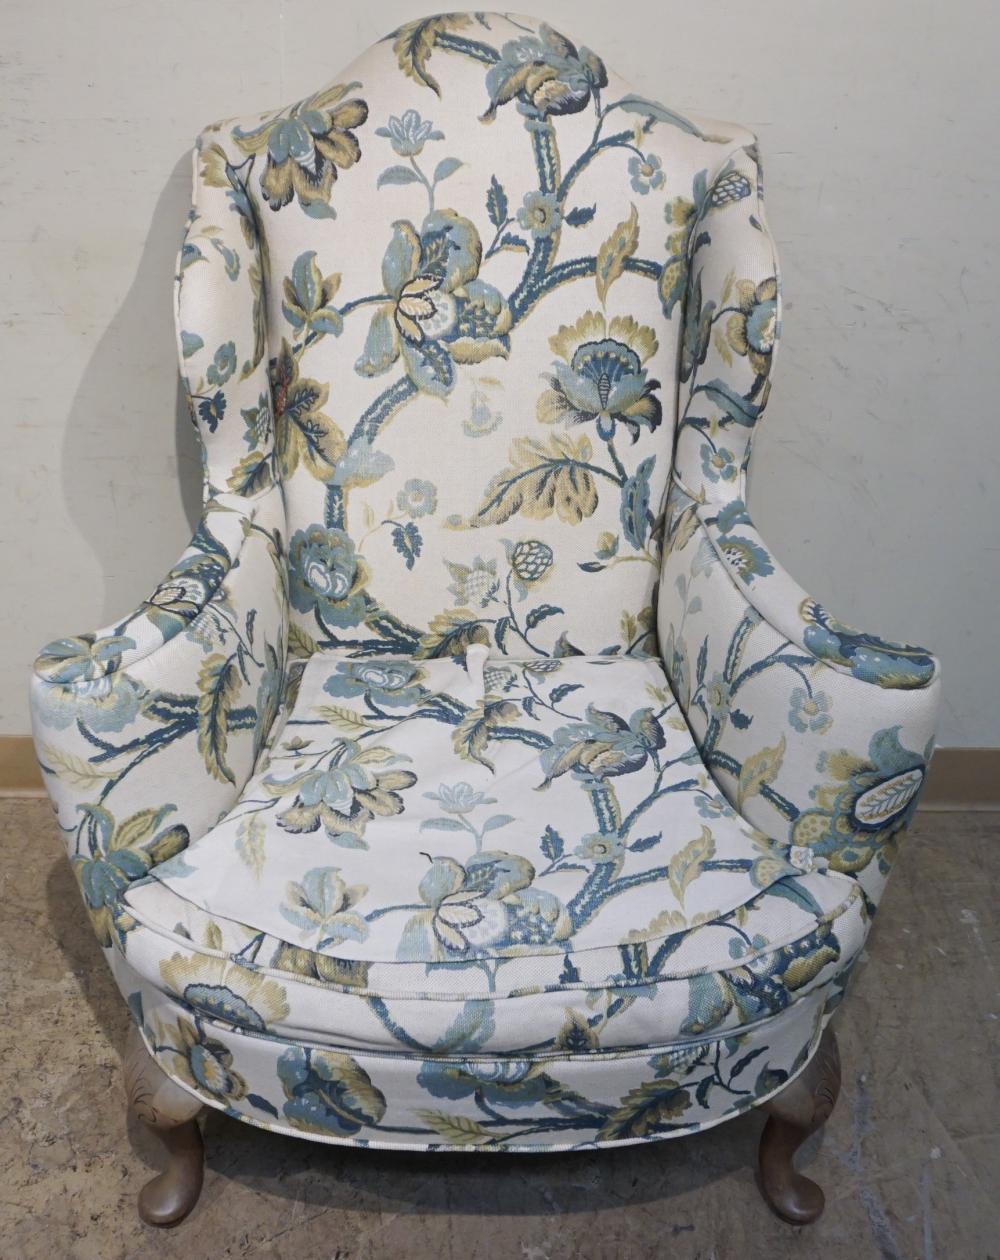 QUEEN ANNE STYLE FLORAL UPHOLSTERED 32ebdc